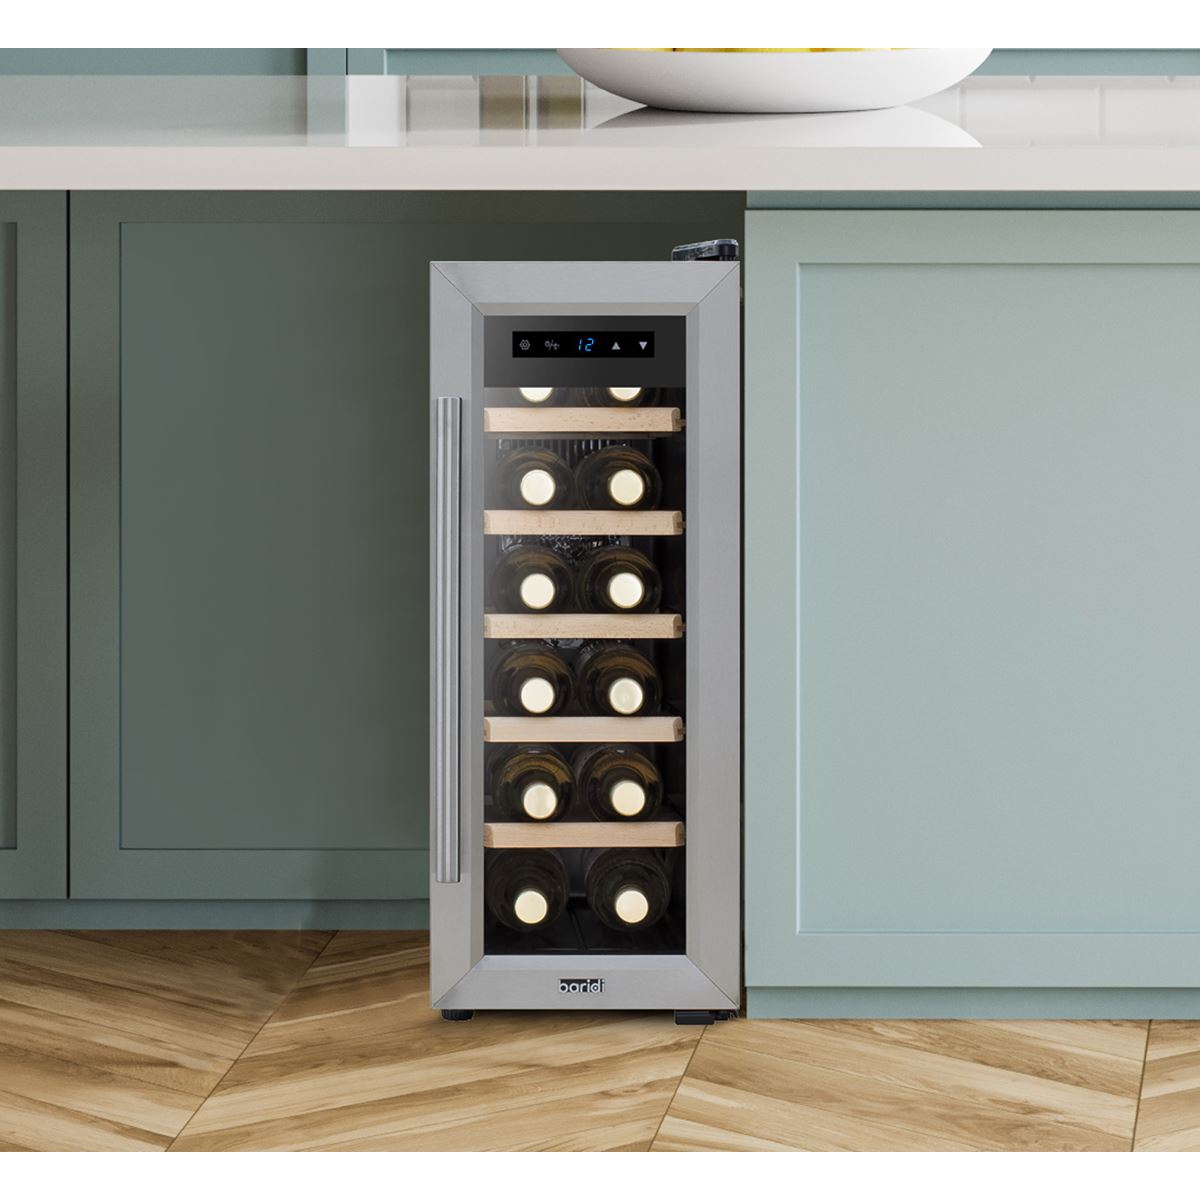 Baridi 12 Bottle Wine Cooler with Digital Touchscreen Controls & LED Light, Stainless Steel